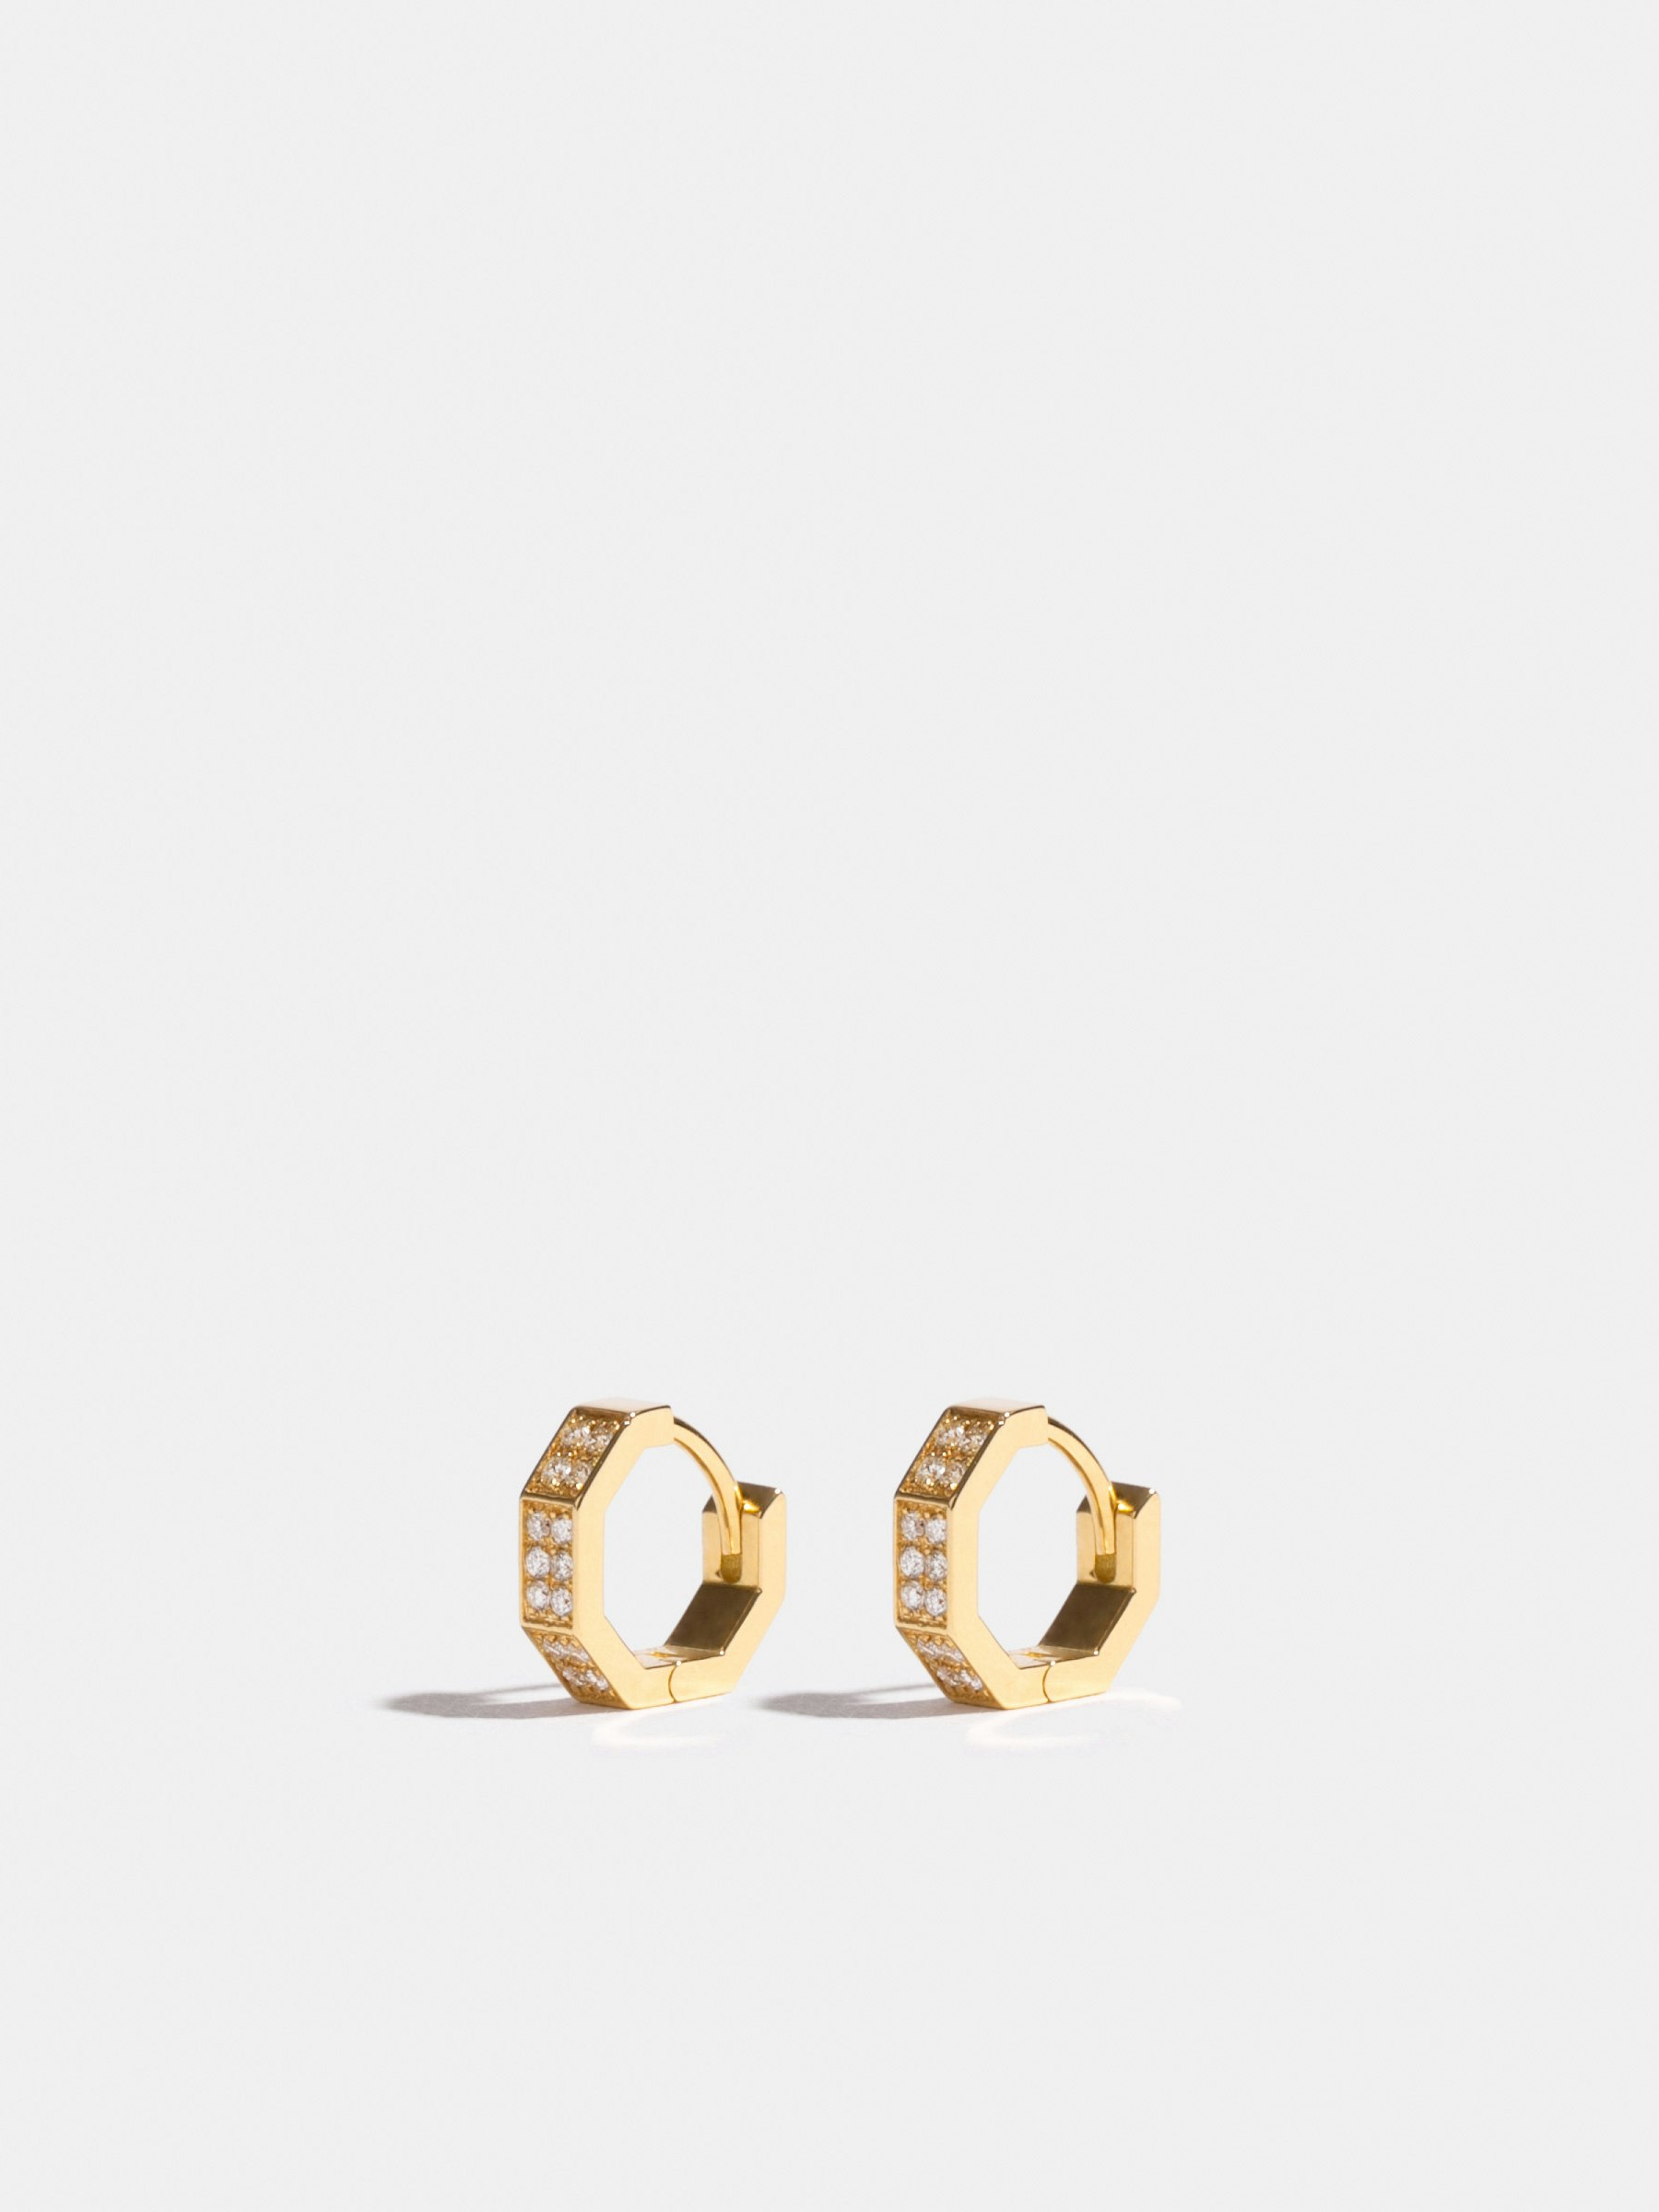 Octogone 10mm earrings in 18k Fairmined ethical yellow gold, paved with lab-grown diamonds, the pair.